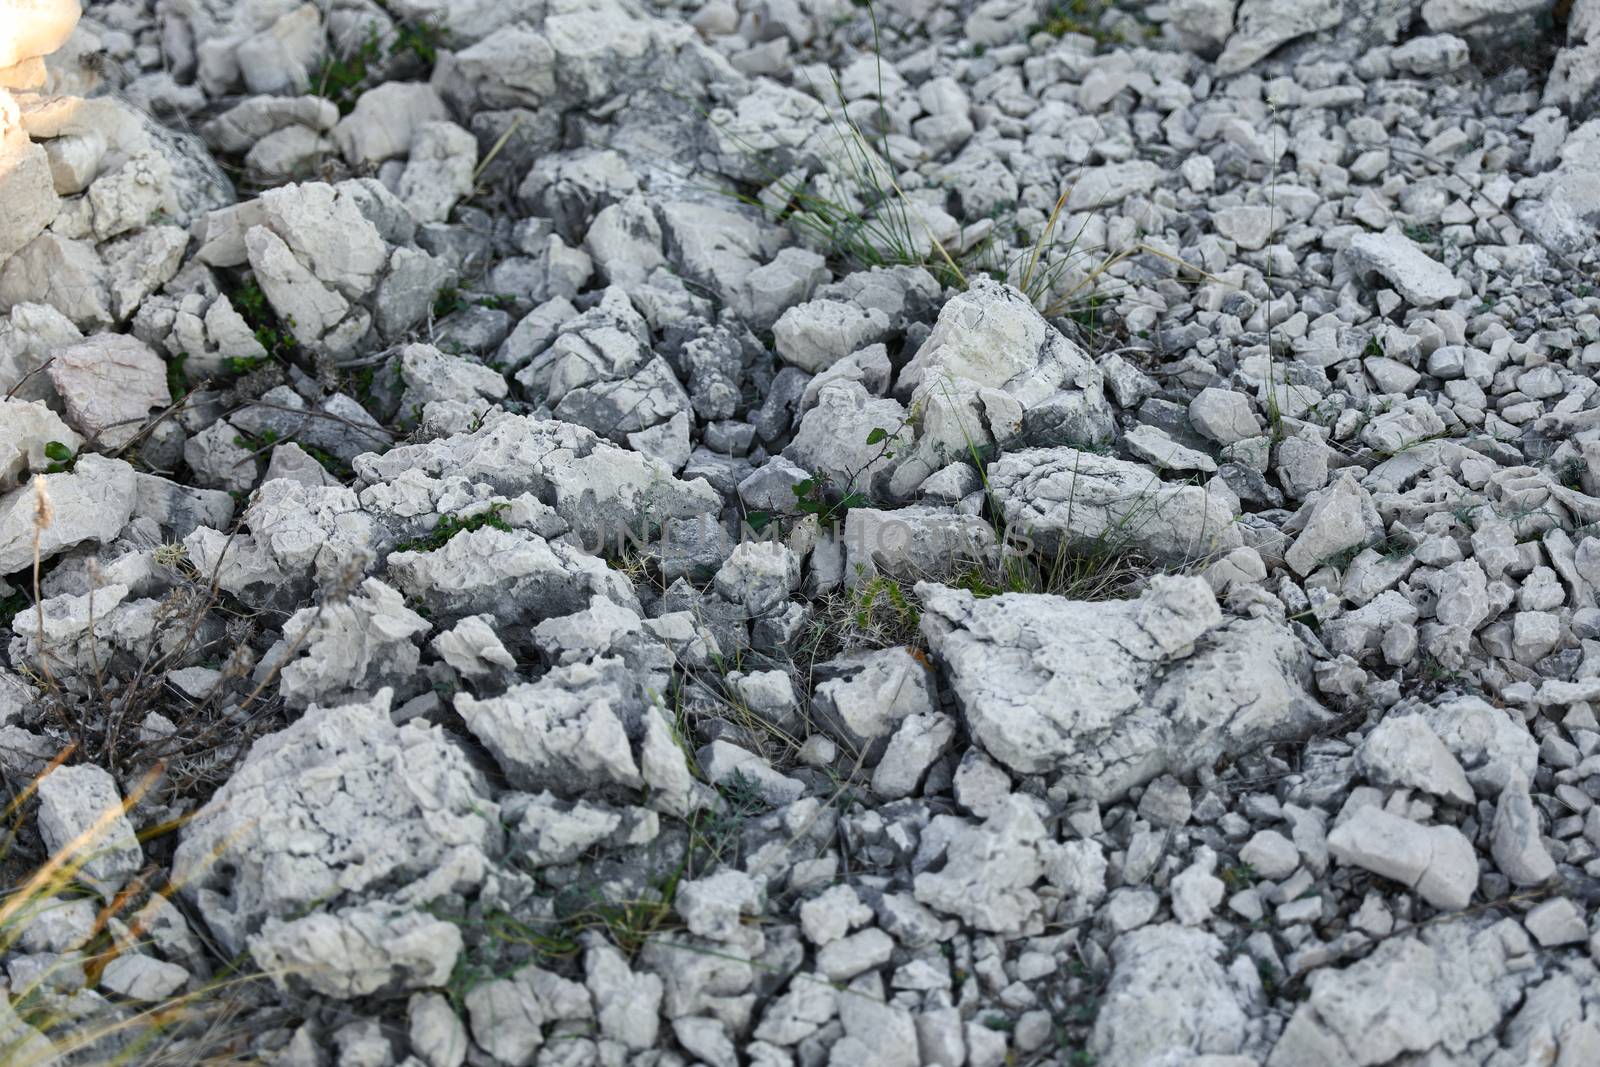 Just grass between stones on the ground